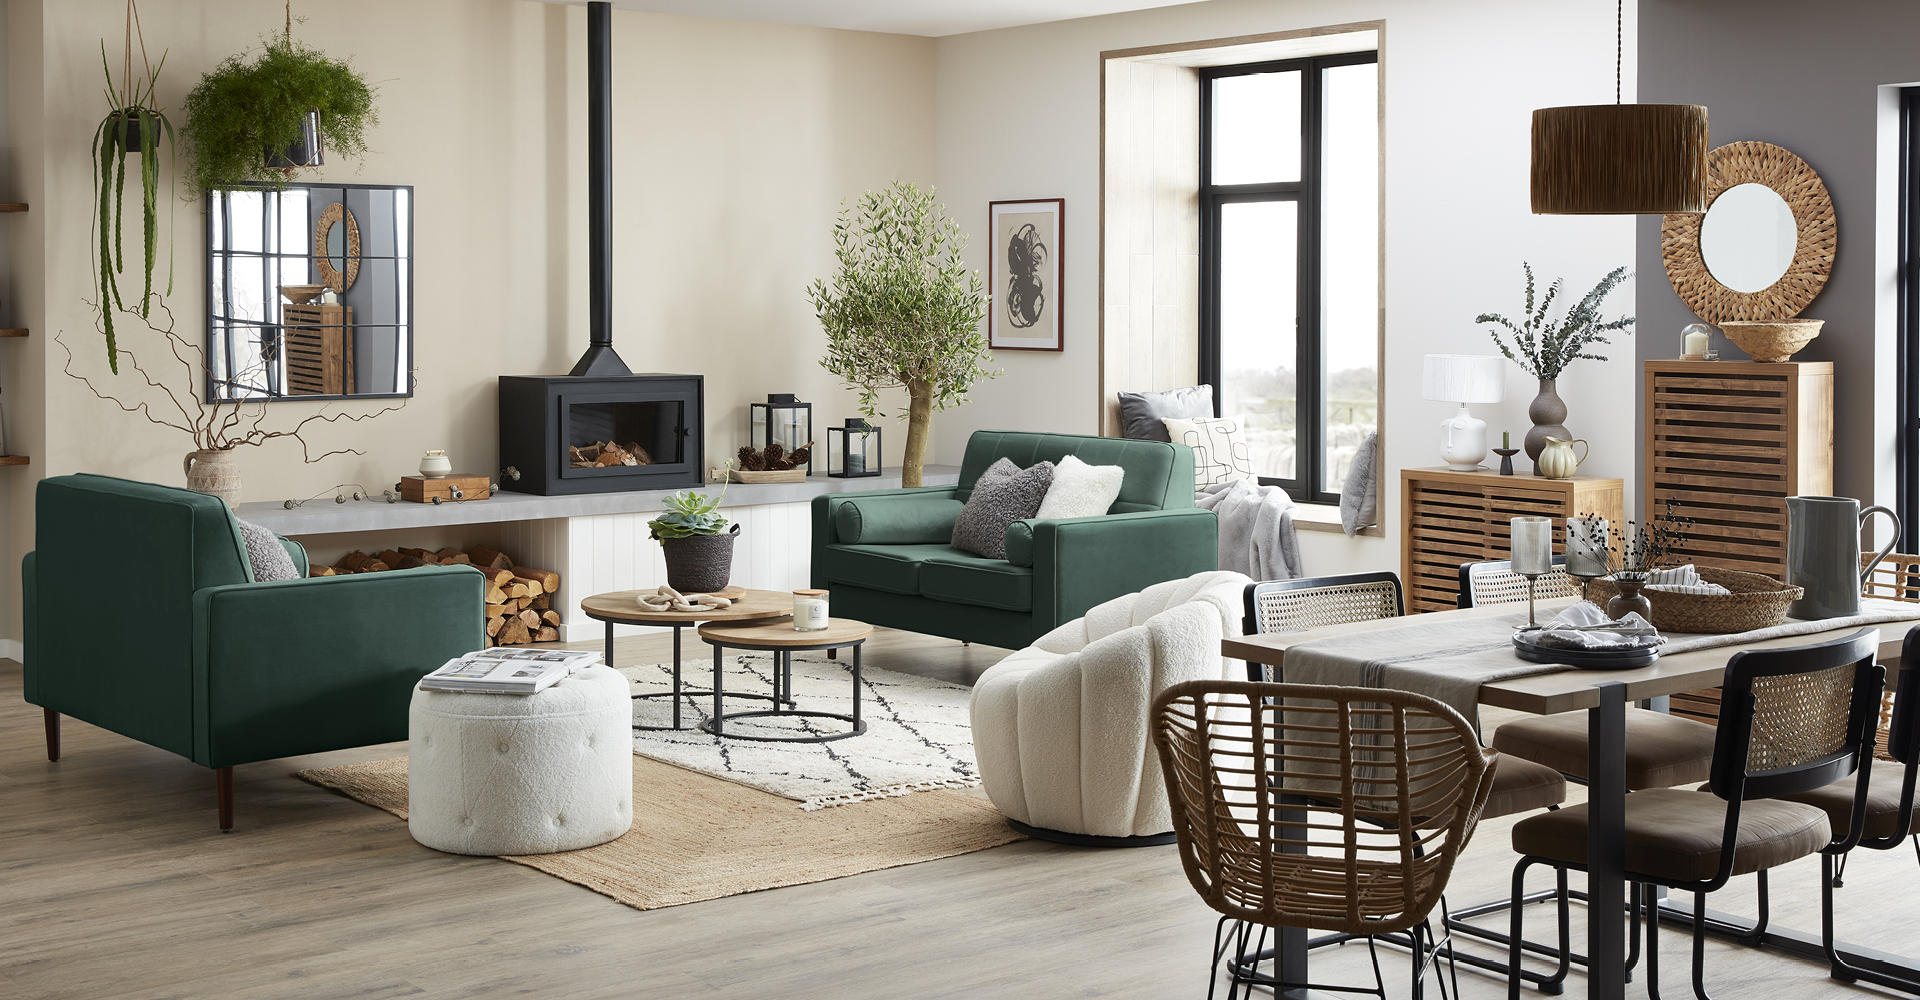 Living room ideas - shop the look